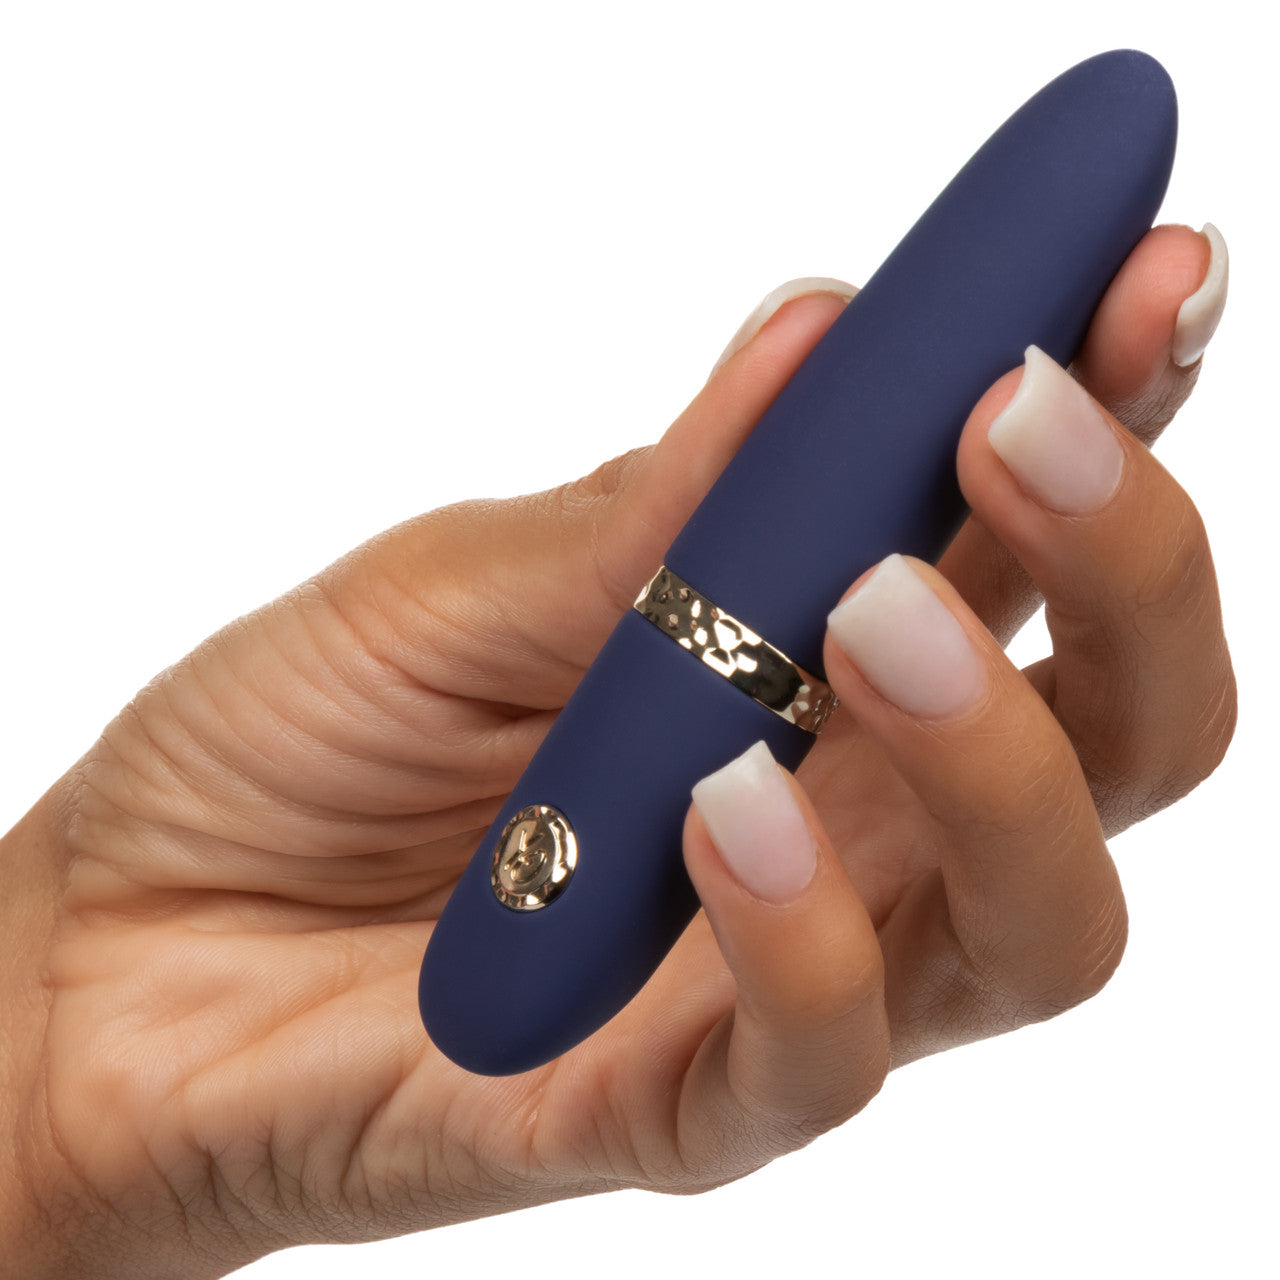 Chic Daisy Pinpoint Bullet Vibrator - Thorn & Feather